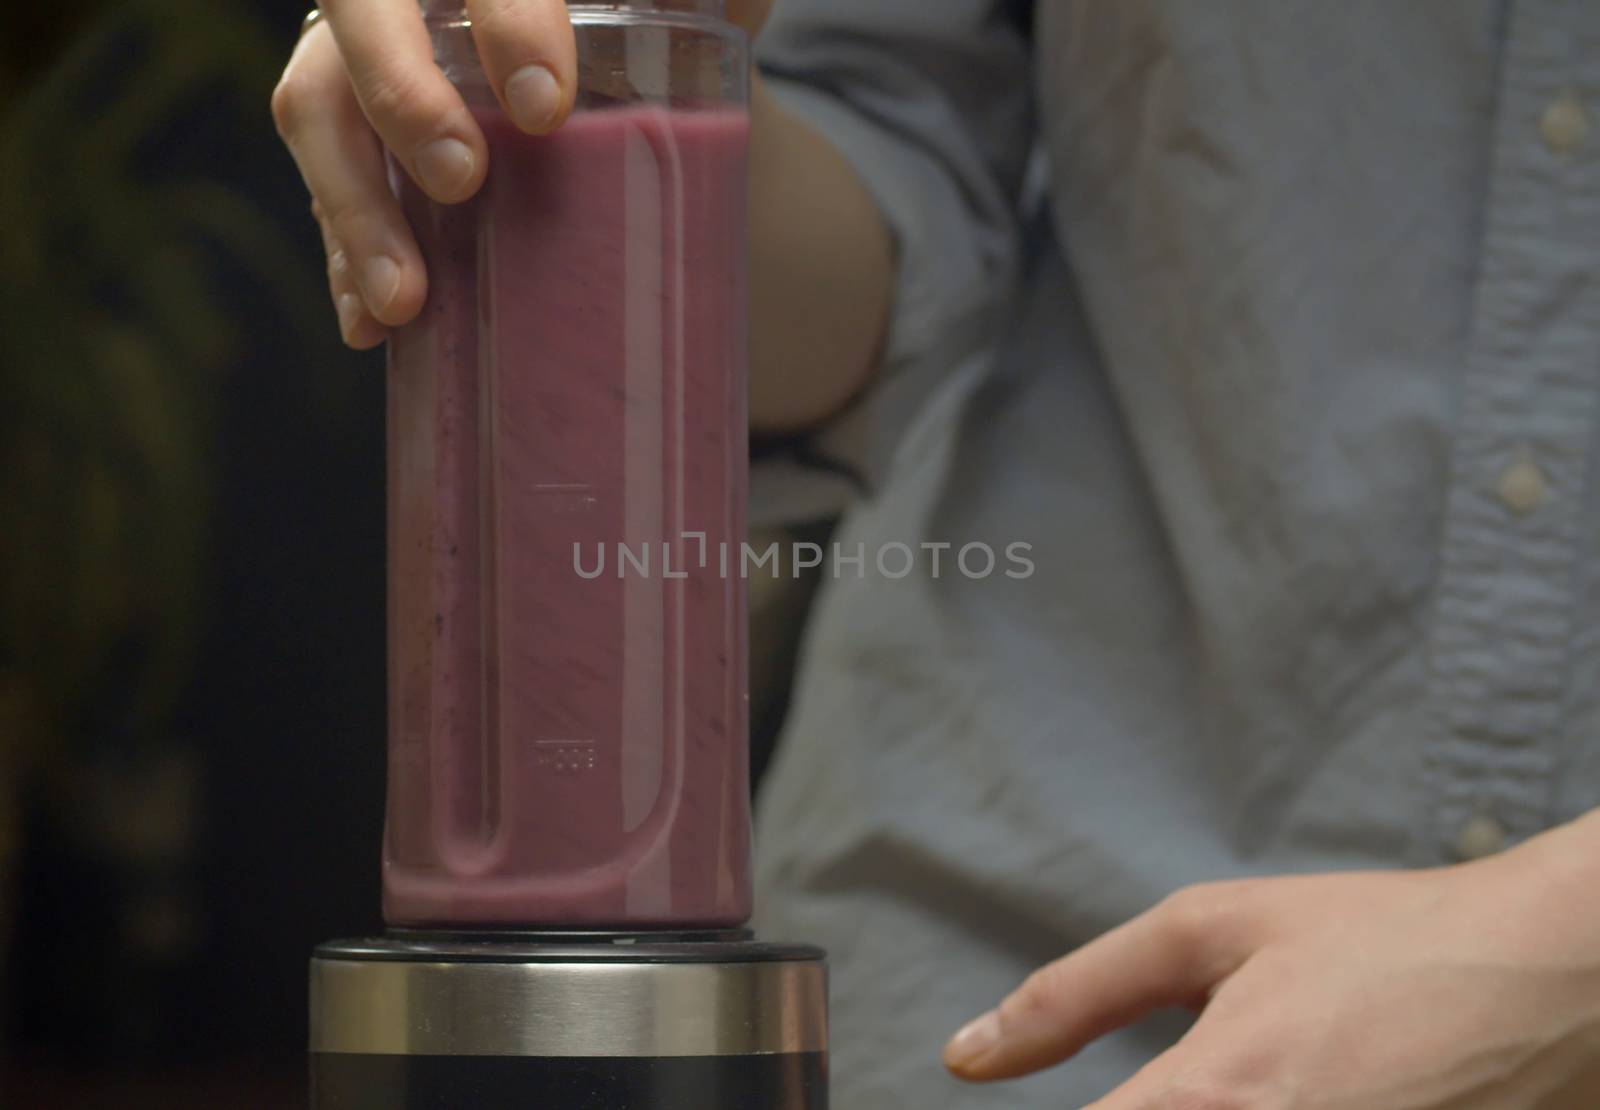 Cooking smoothies in the kitchen. Red banana blackberry smoothie blending in blender. Healthy lifestyle and eating concept